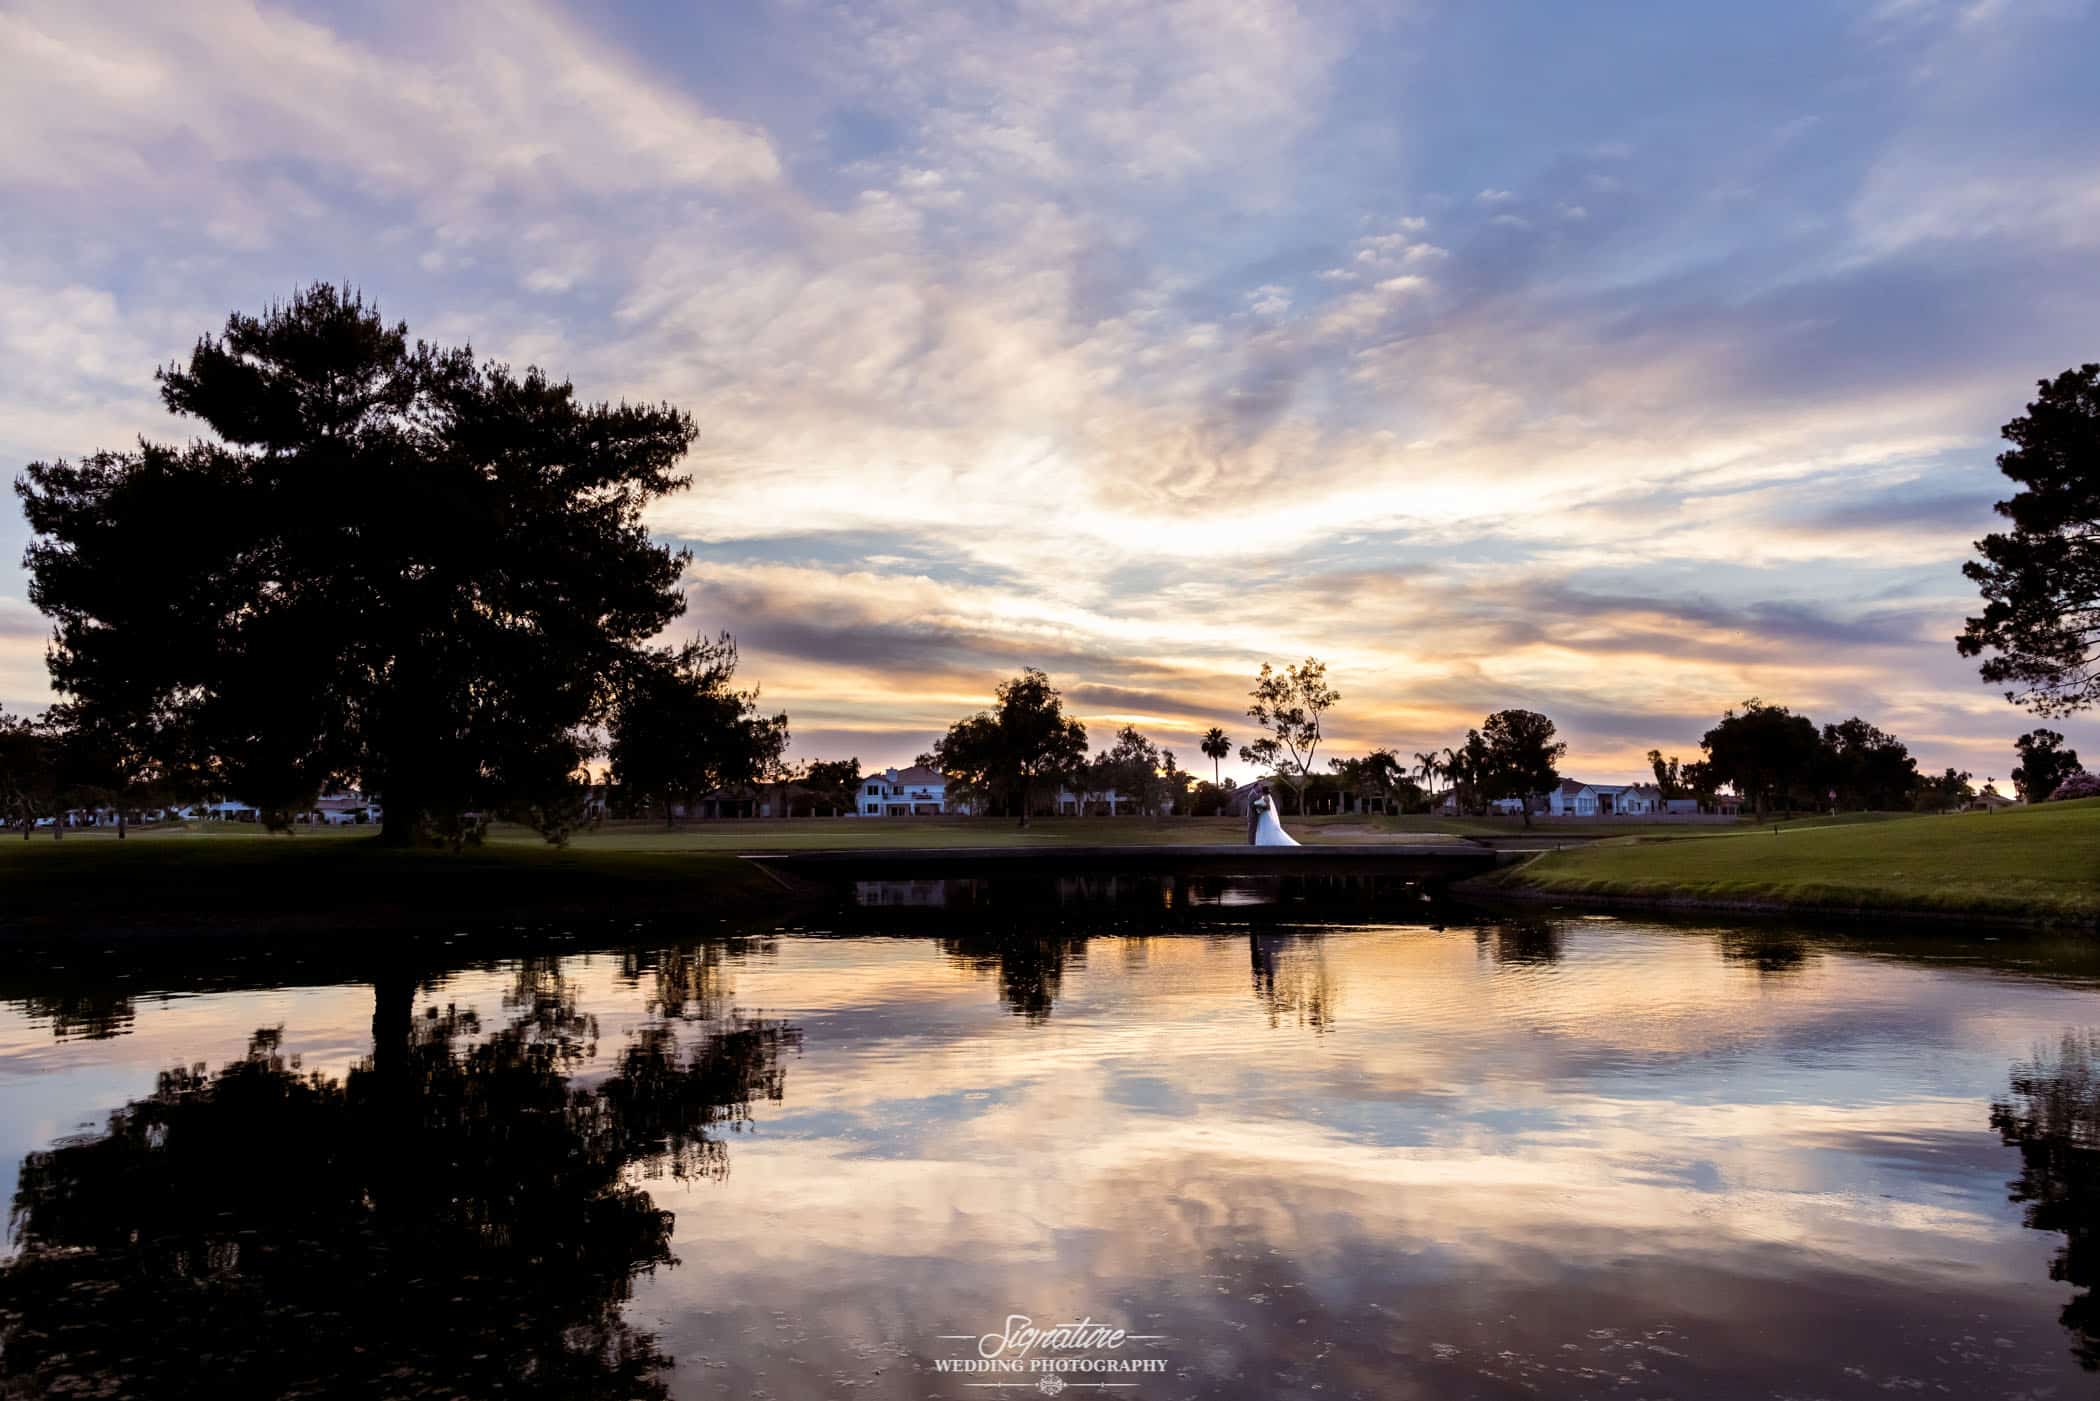 Bride and groom kissing in behind pond at sunset